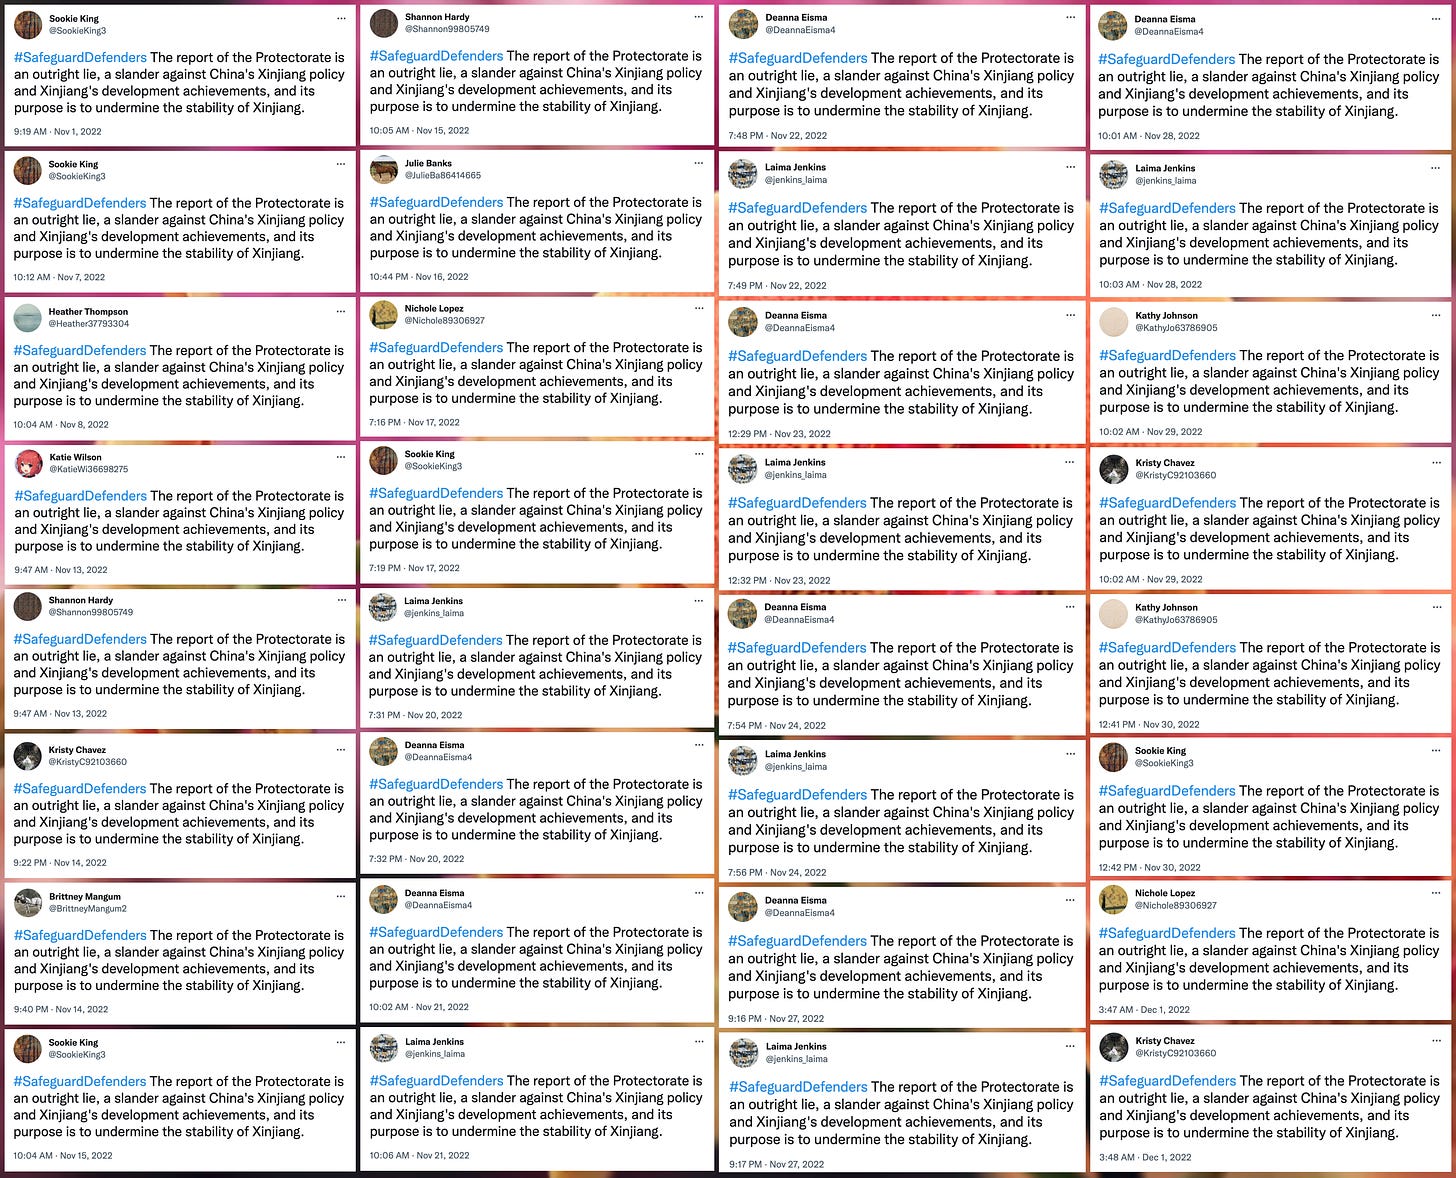 collage of 32 identical tweets with the text "#SafeguardDefenders the report of the protectorate is an outright lie, a slander against China's Xinjiang policy and Xinjiang's development achievements, and its purpose is to undermine the stability of Xinjiang."